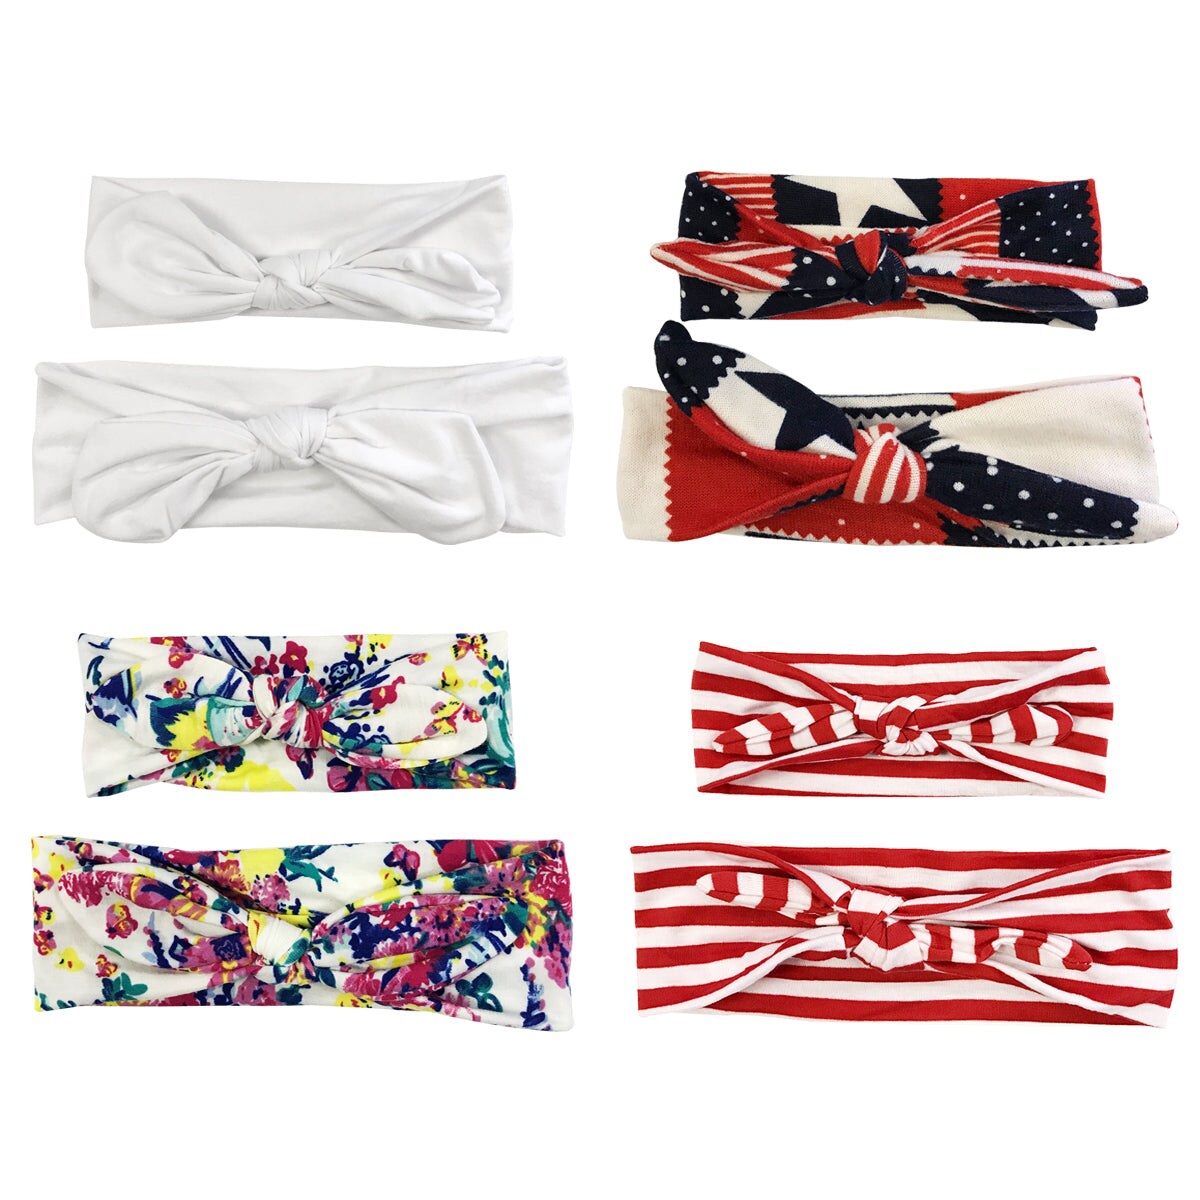 Wrapables Mommy and Me Boho Headband Headwrap, Red White and Blue